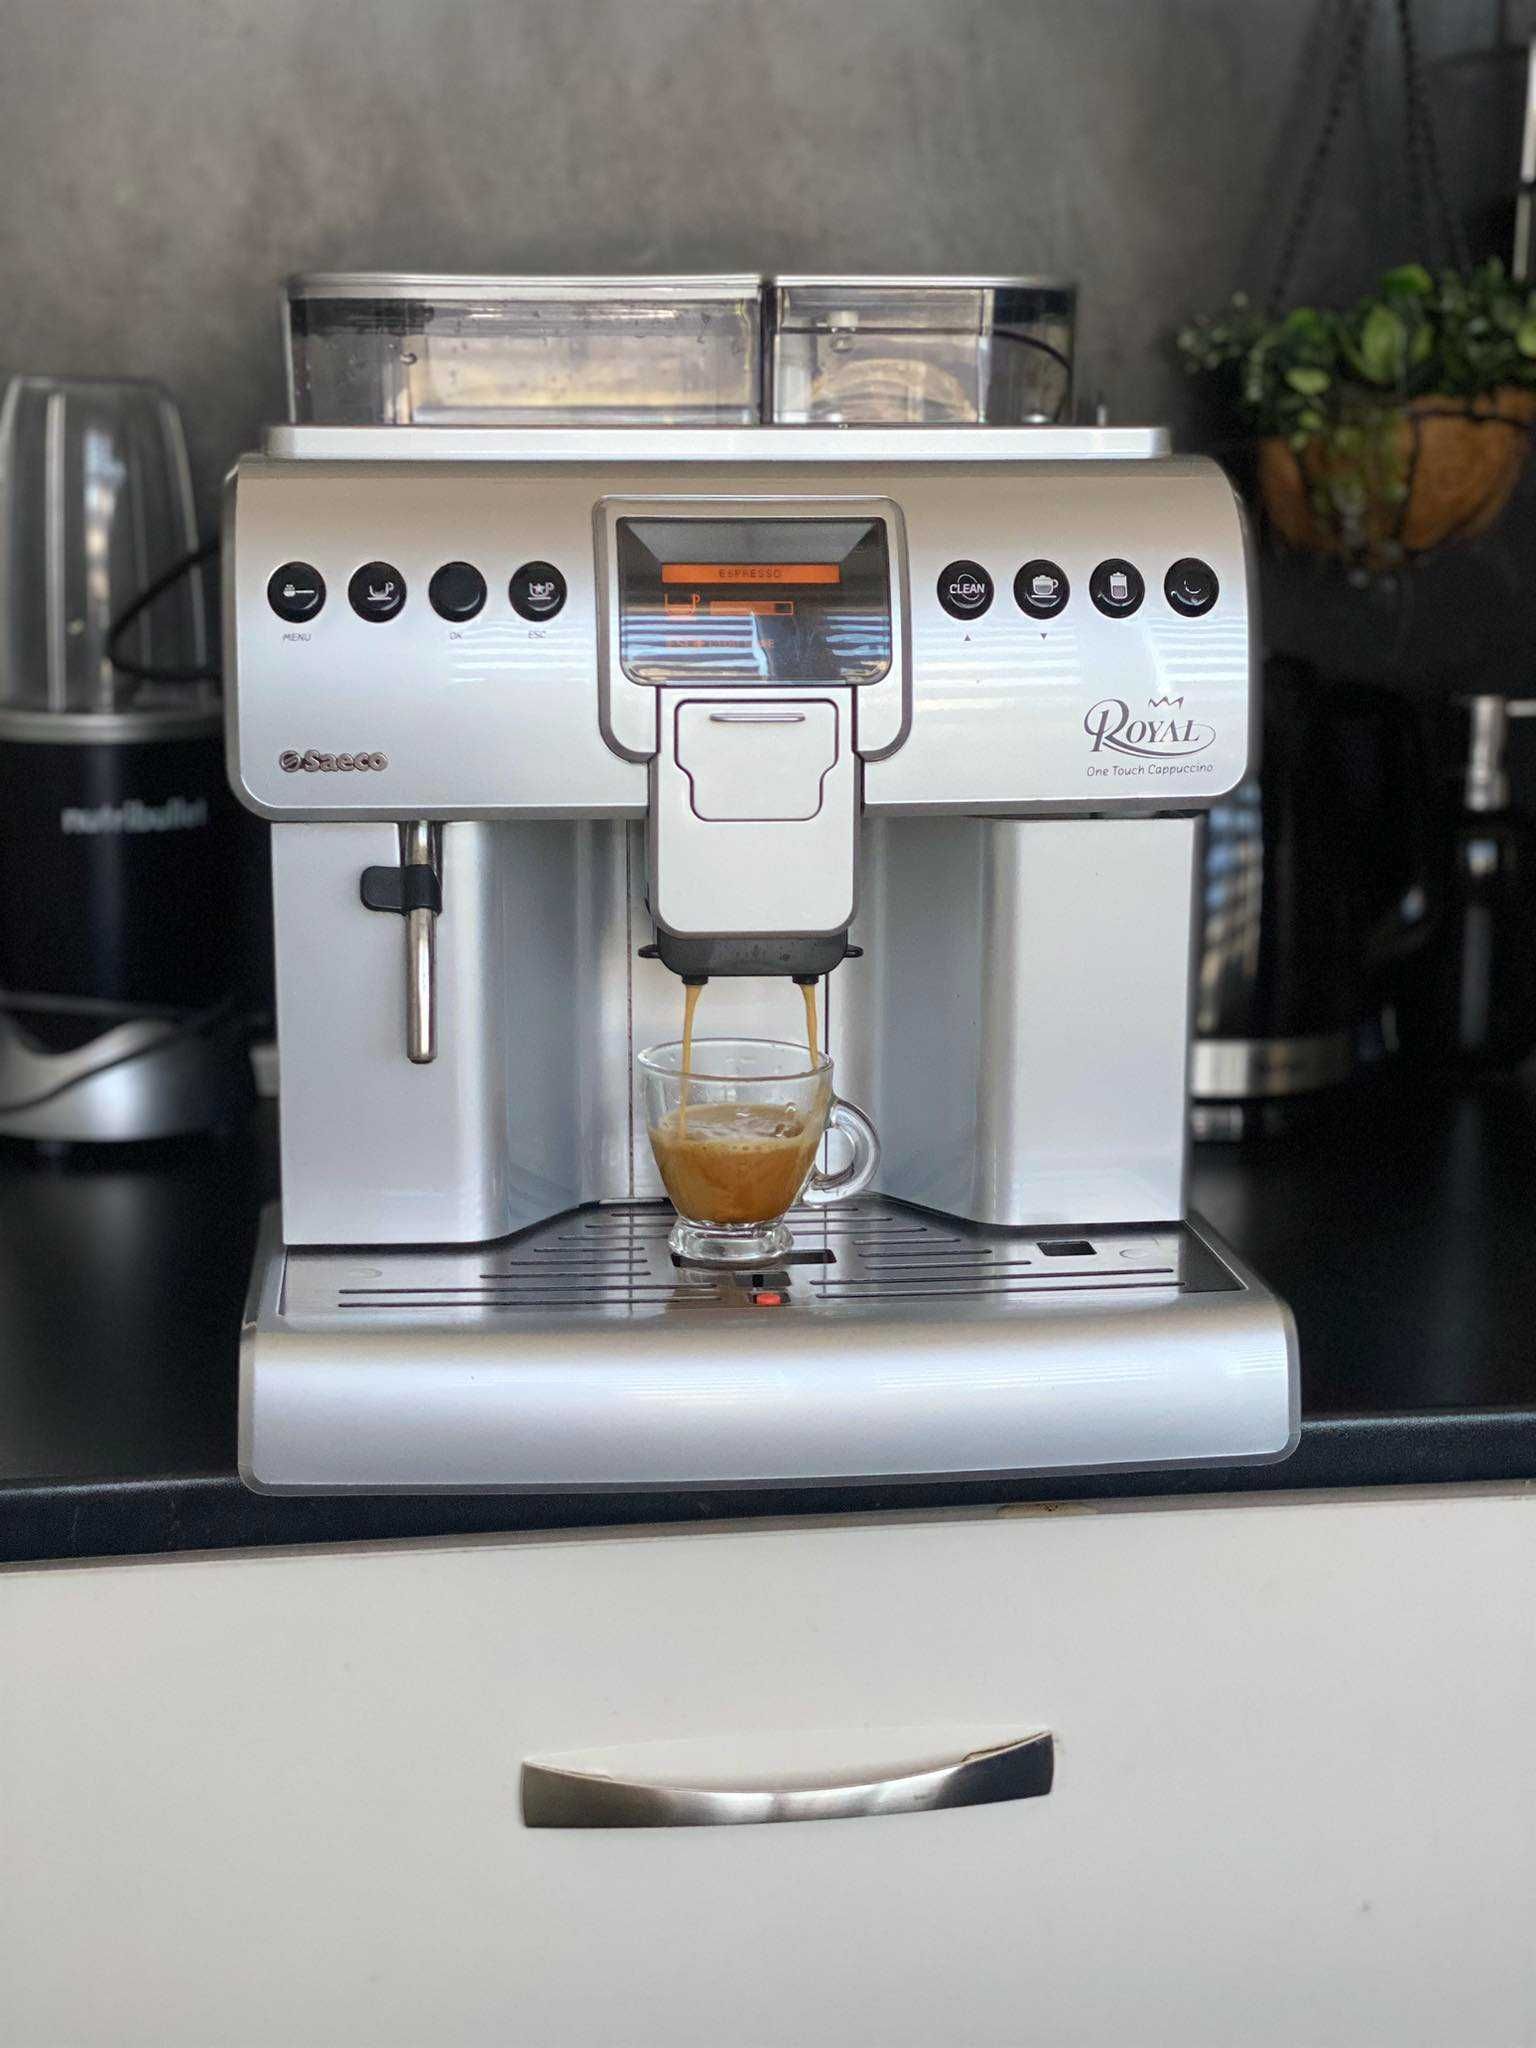 Saeco royal one touch cappuccino